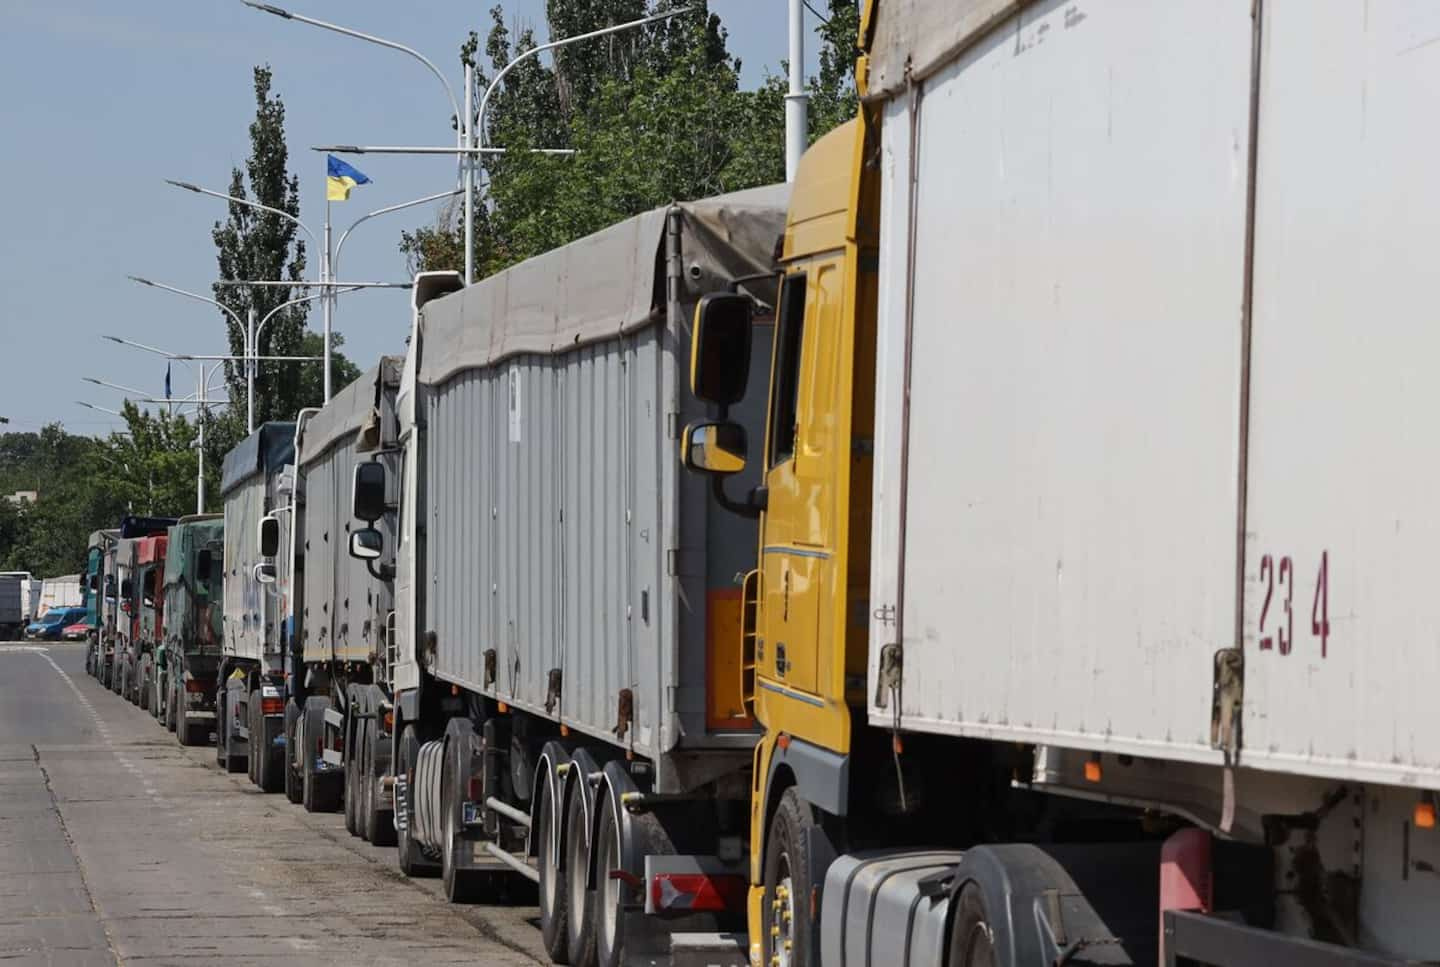 Resumption of grain exports from Ukraine is 'a matter of life and death', says Borrell